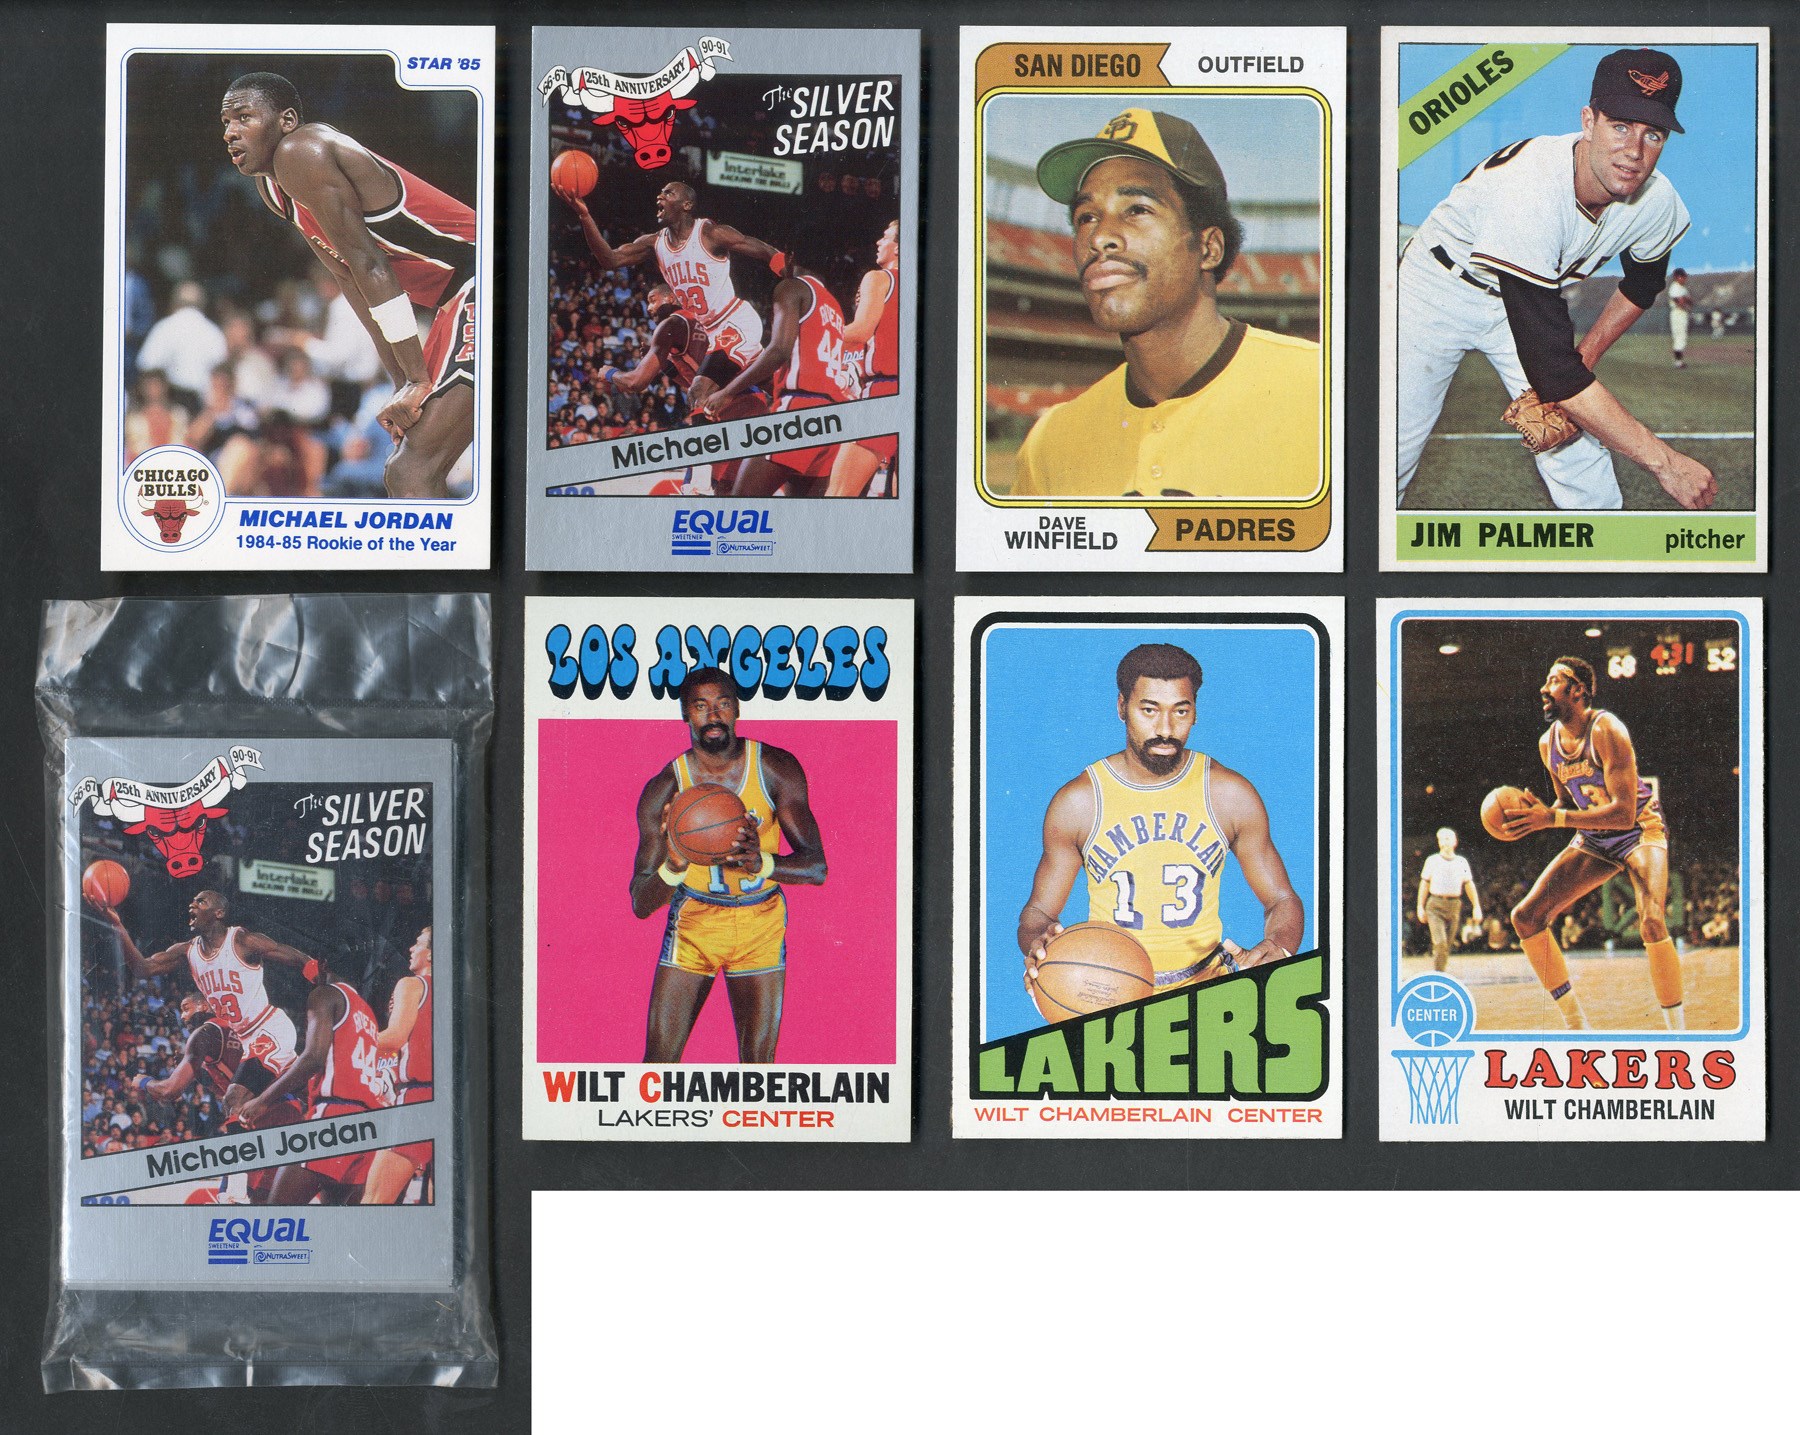 Baseball and Trading Cards - 1960s-80s Superstar Collection w/Jordan & Chamberlain (8)